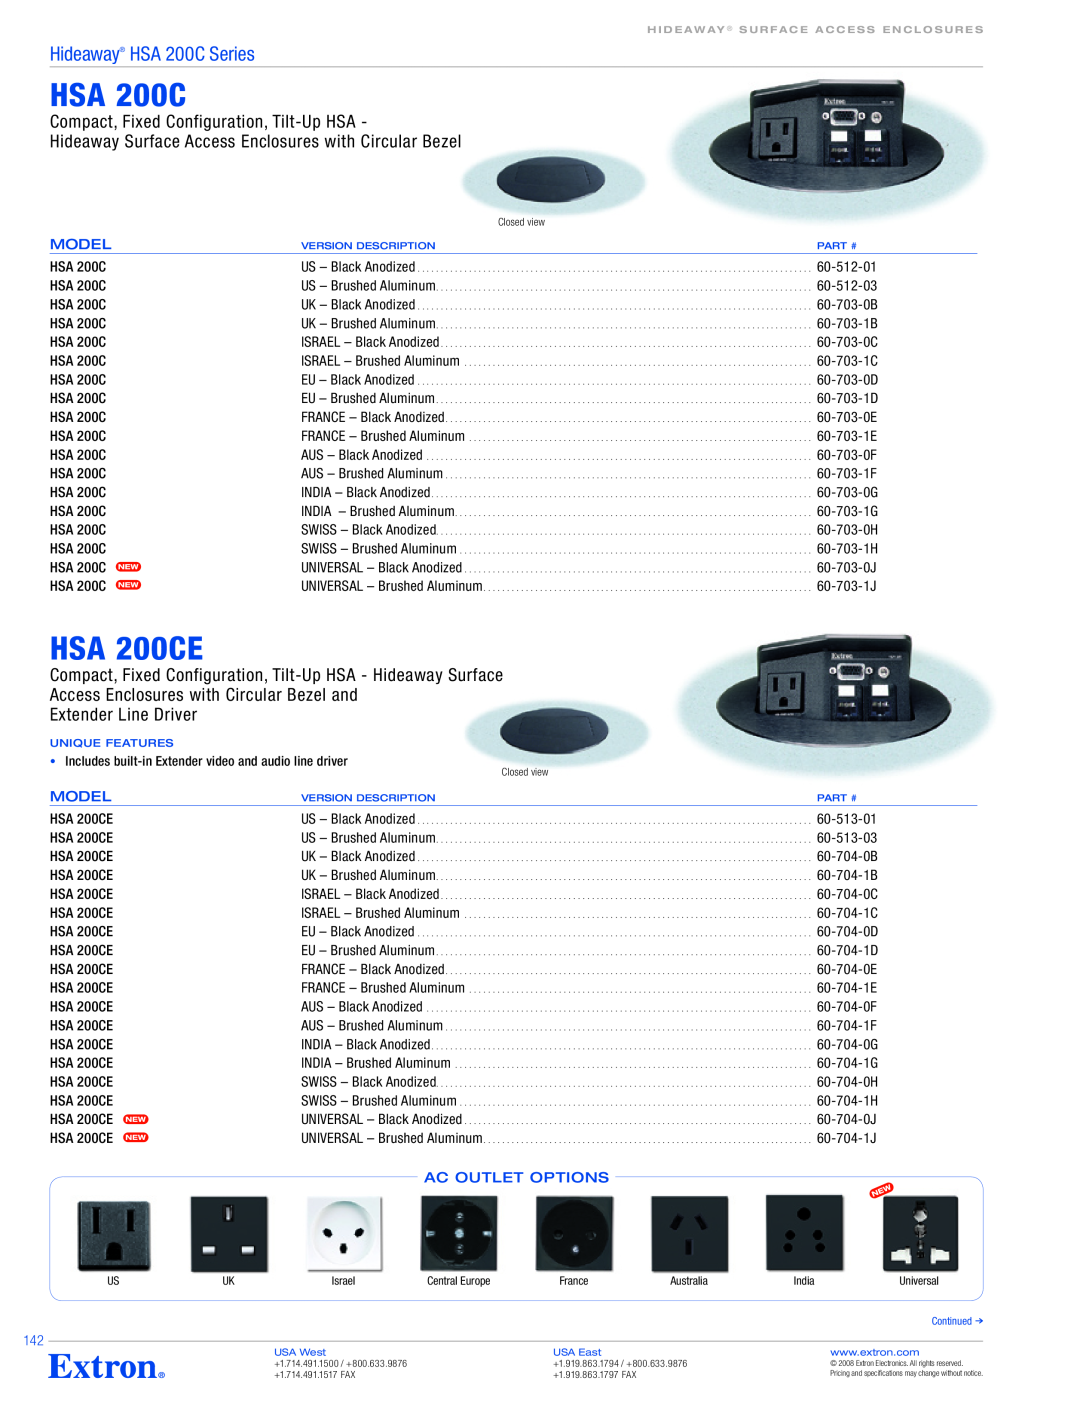 Extron electronic HSA 200CE Hideaway HSA 200C Series, Compact, Fixed Configuration, Tilt-Up HSA, Model, AC Outlet Options 